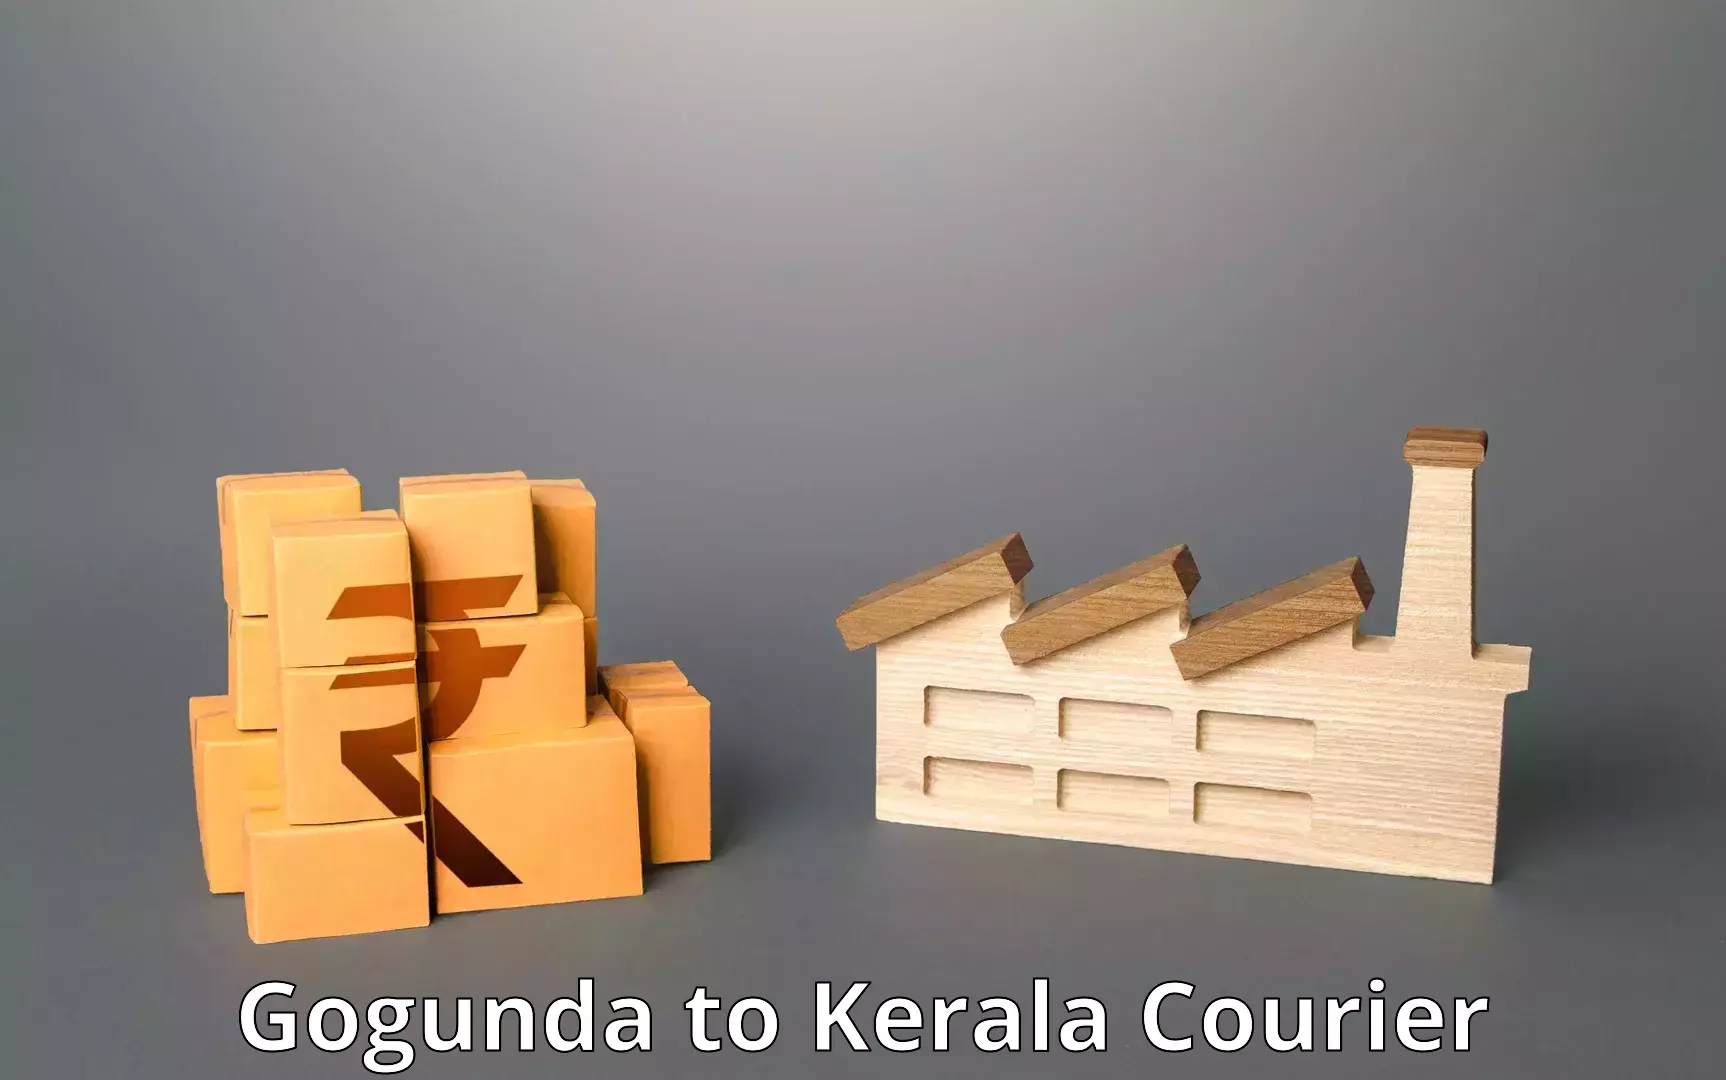 Courier membership Gogunda to Cochin University of Science and Technology